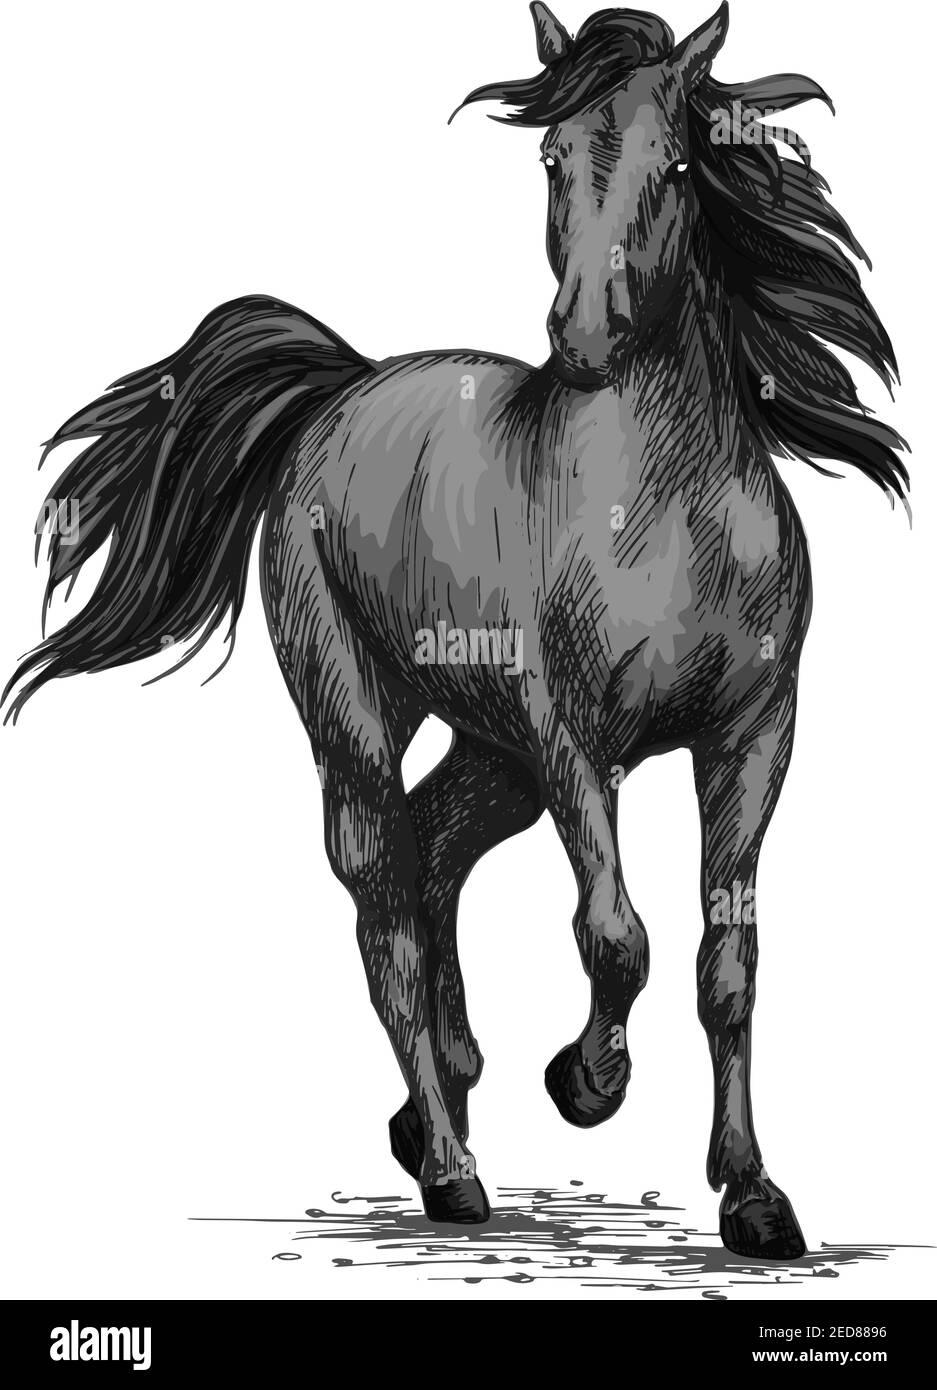 Horse racing or galloping vector sketch. Wild mustang running on races. Farm black stallion animal symbol for equestrian horserace club or sport ridin Stock Vector